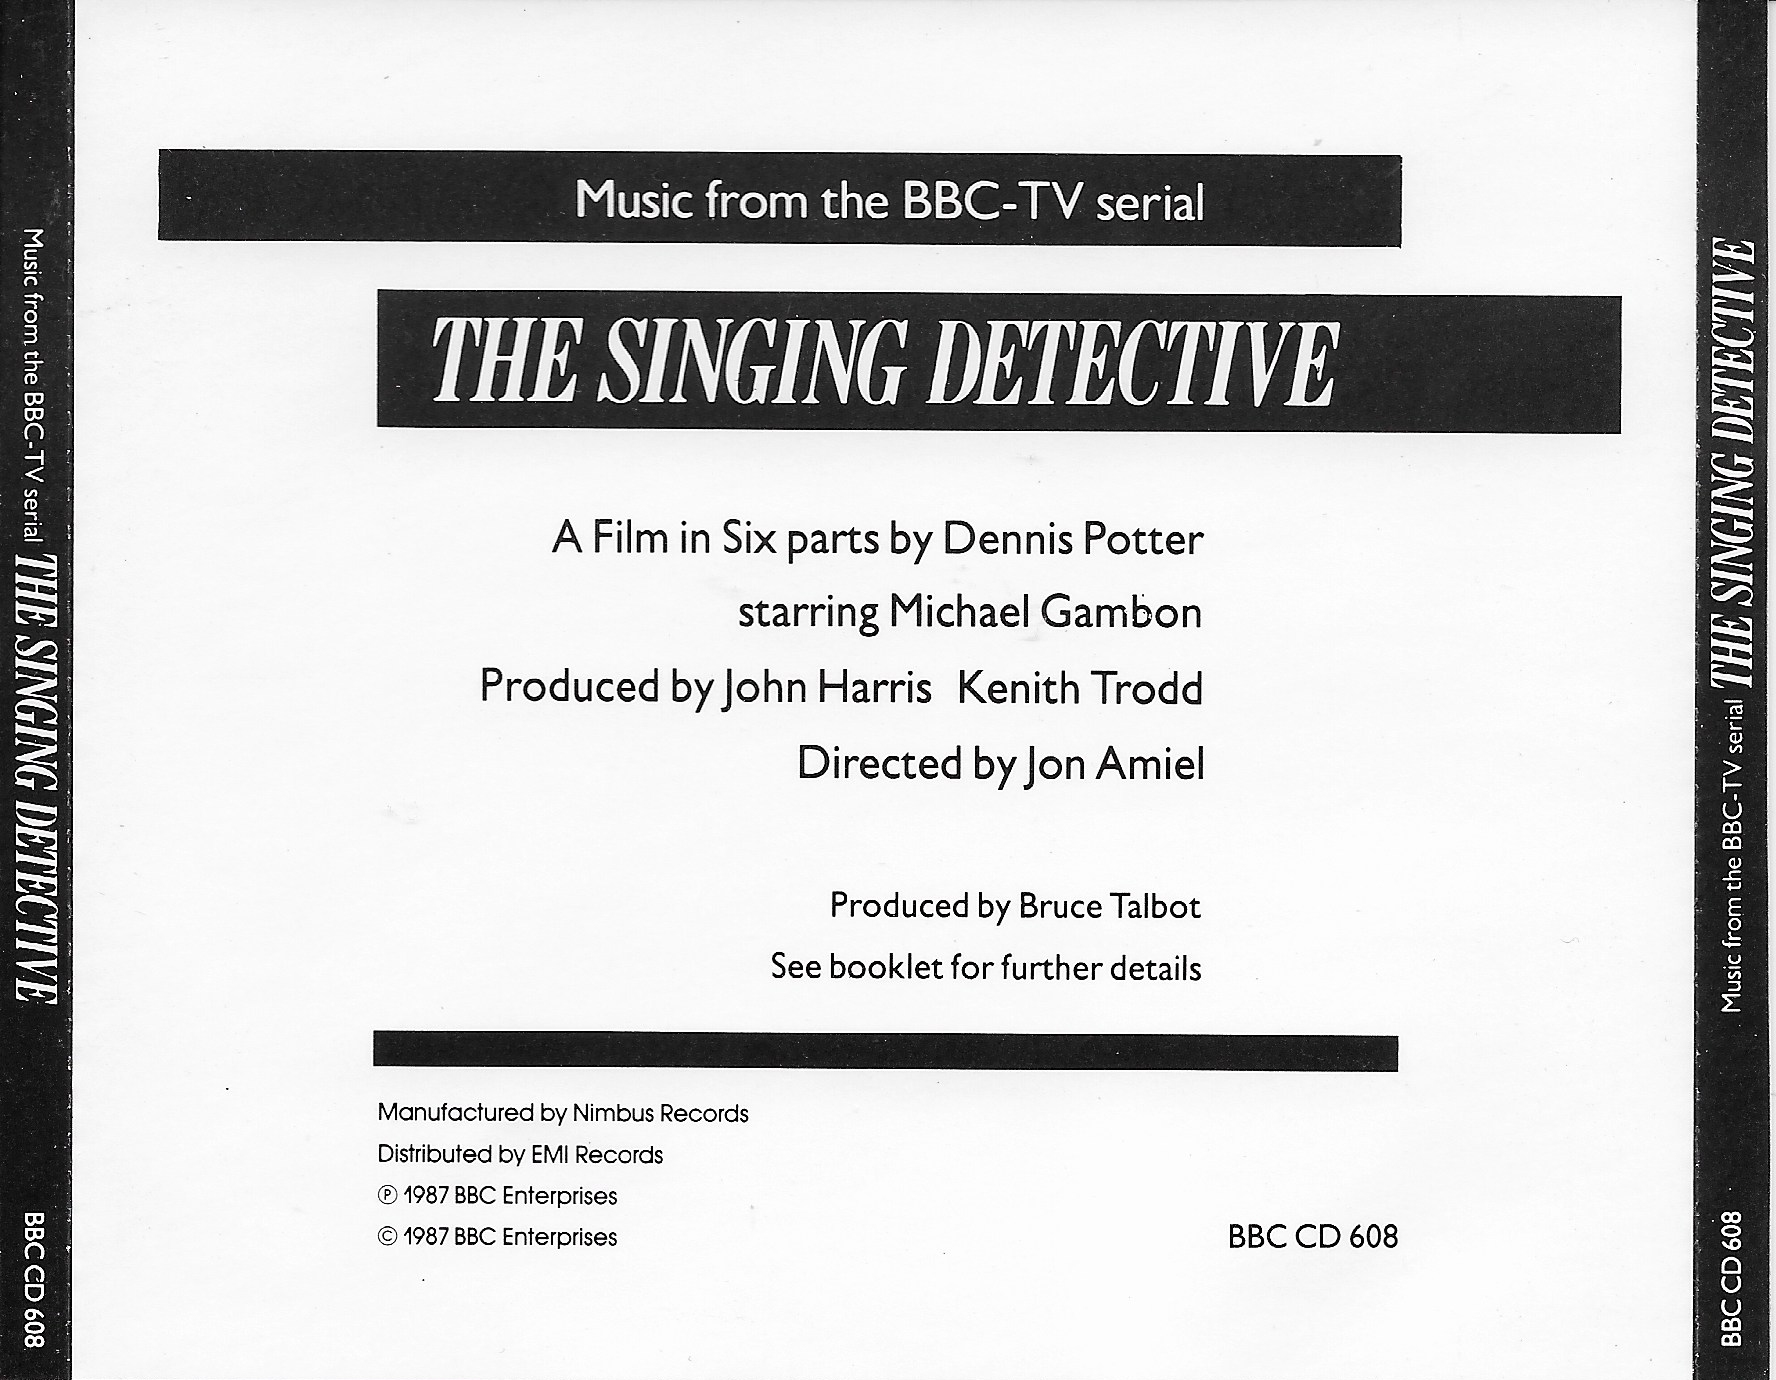 Picture of BBCCD608 The singing detective by artist Various from the BBC records and Tapes library